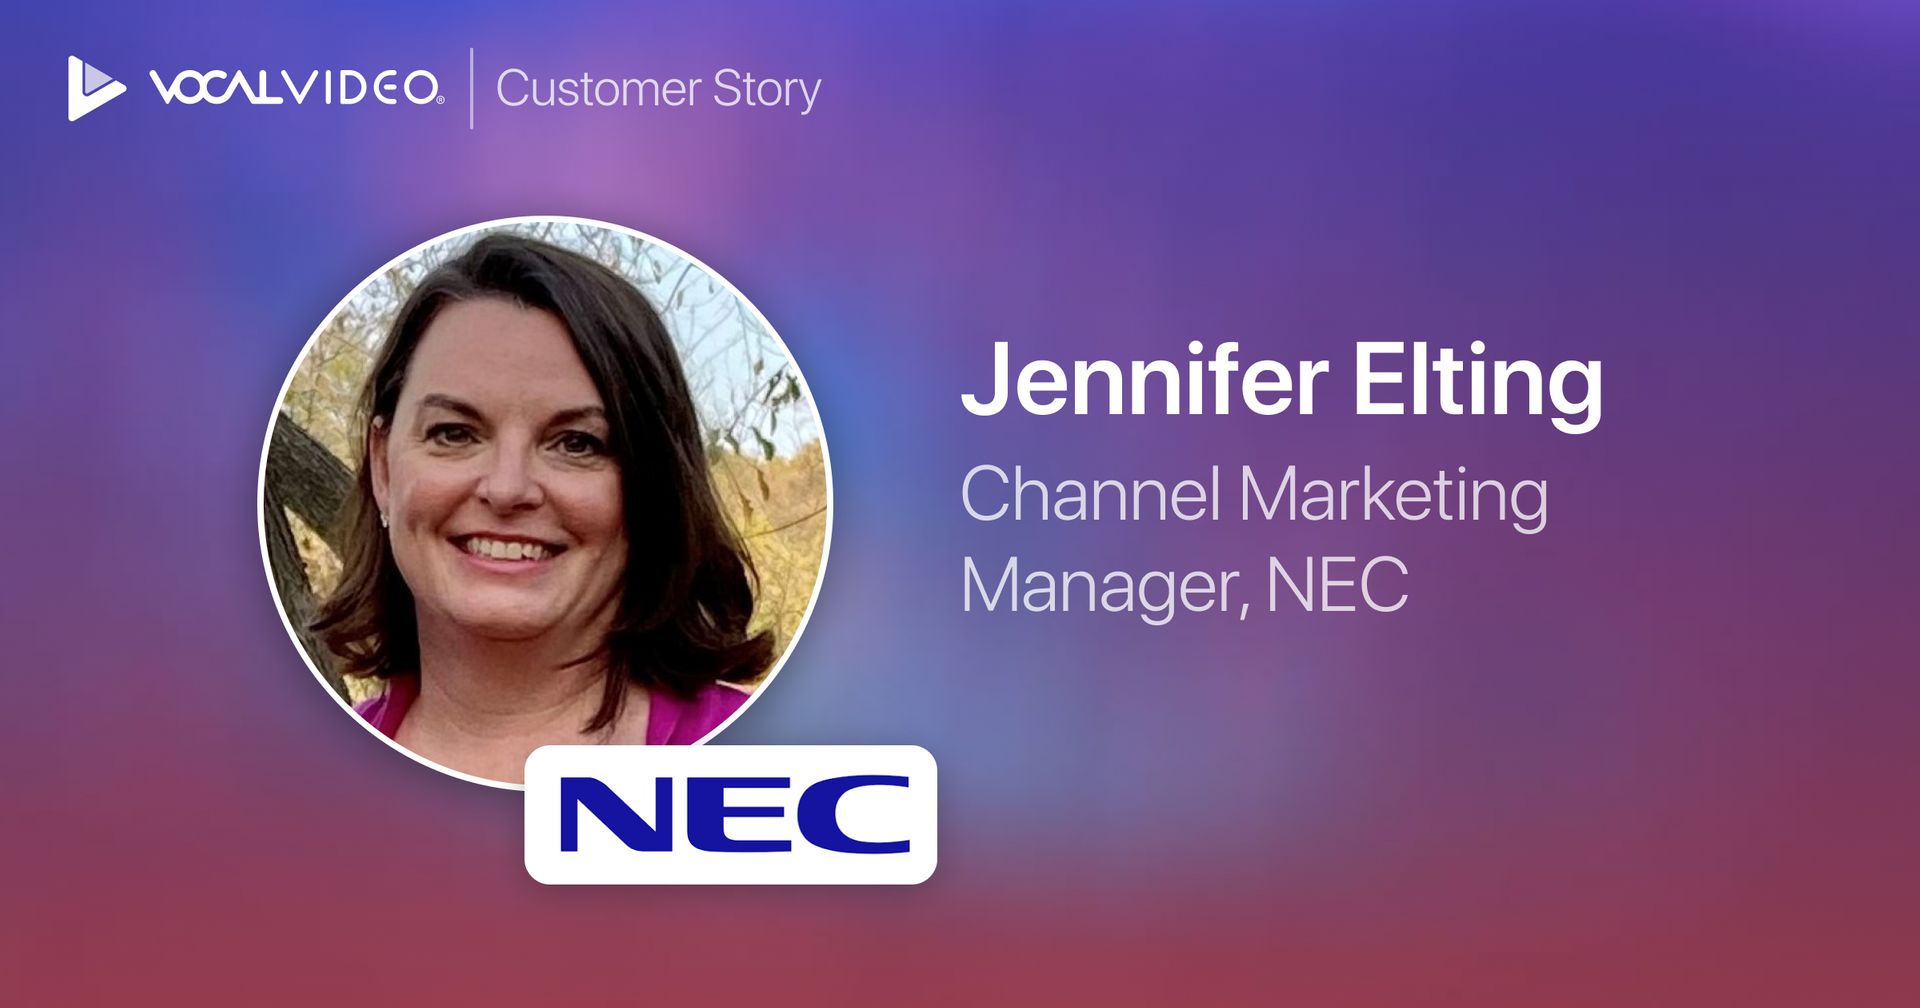 NEC Dramatically Speeds Up Video Testimonial Creation With This Simple Process